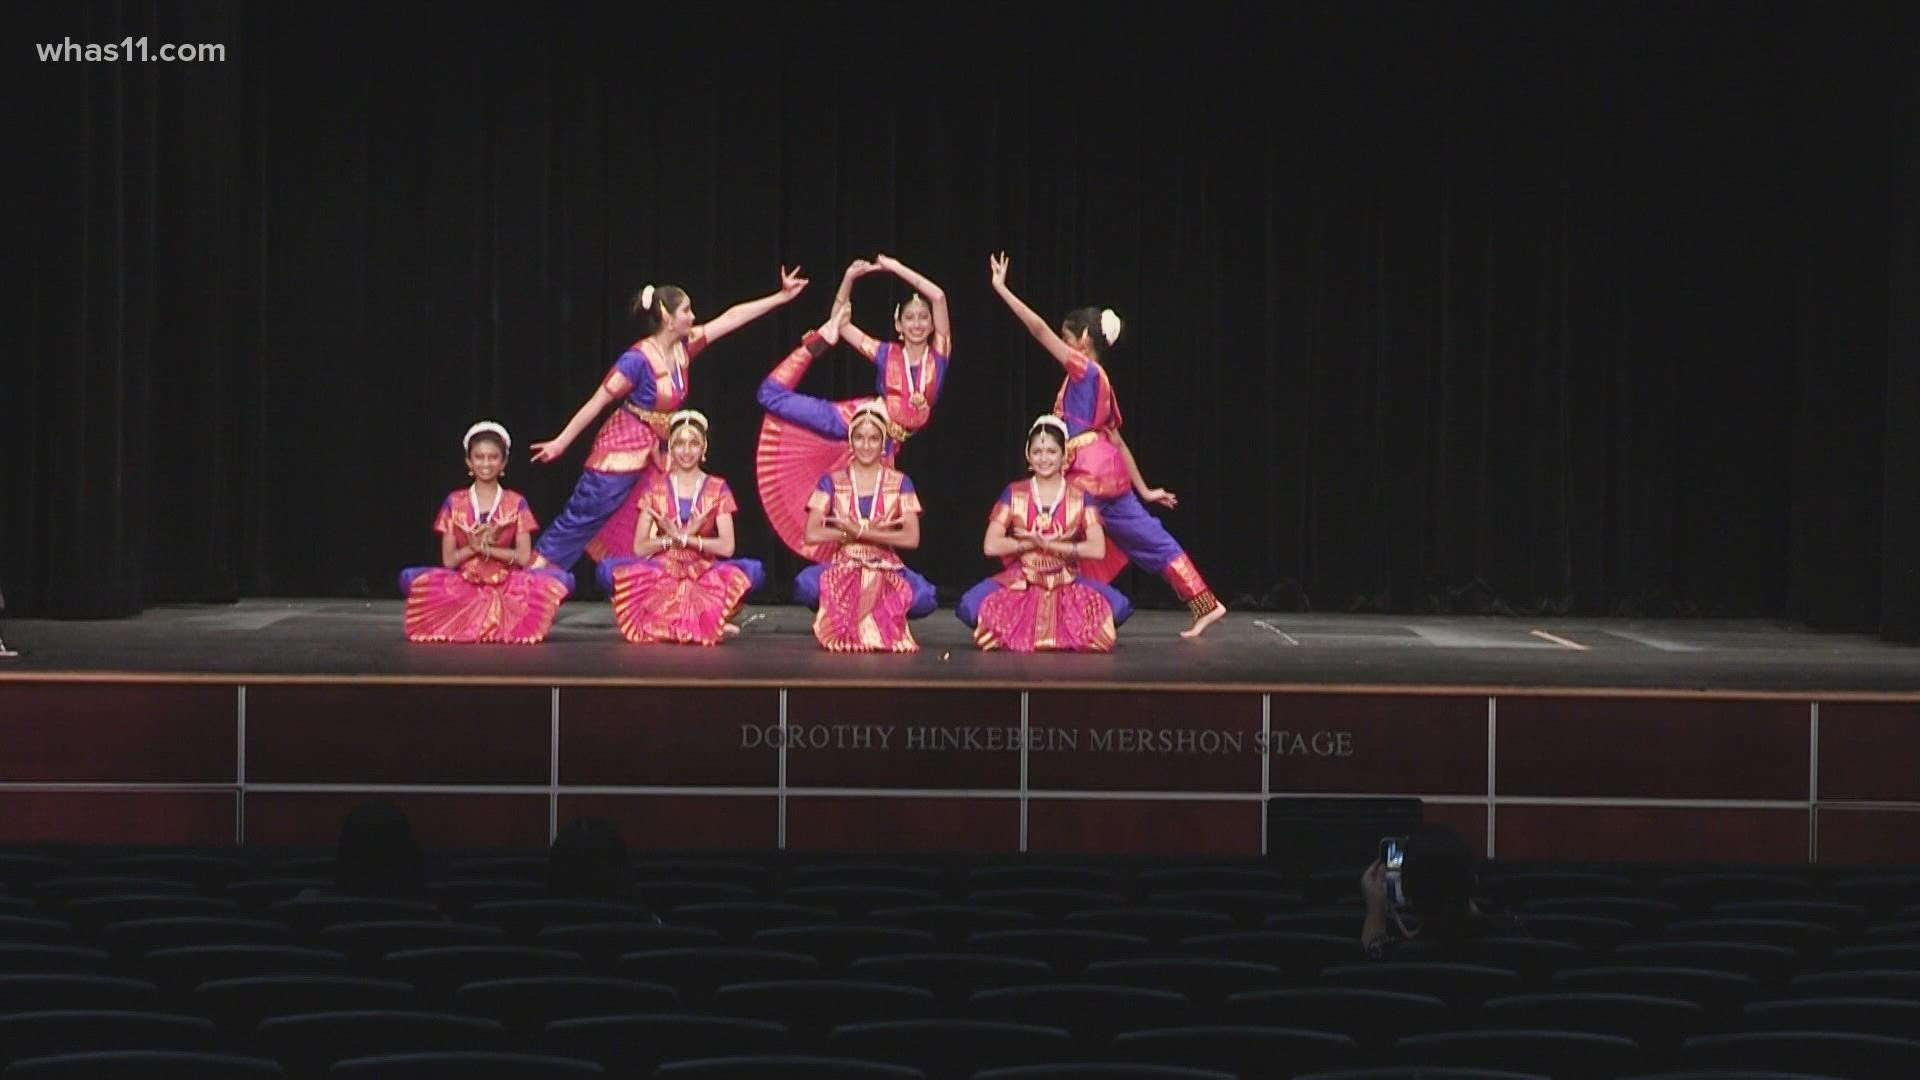 The dance recital showcases traditional Indian and Western dance styles and this is the ninth year the academy has held the show to benefit the Crusade.